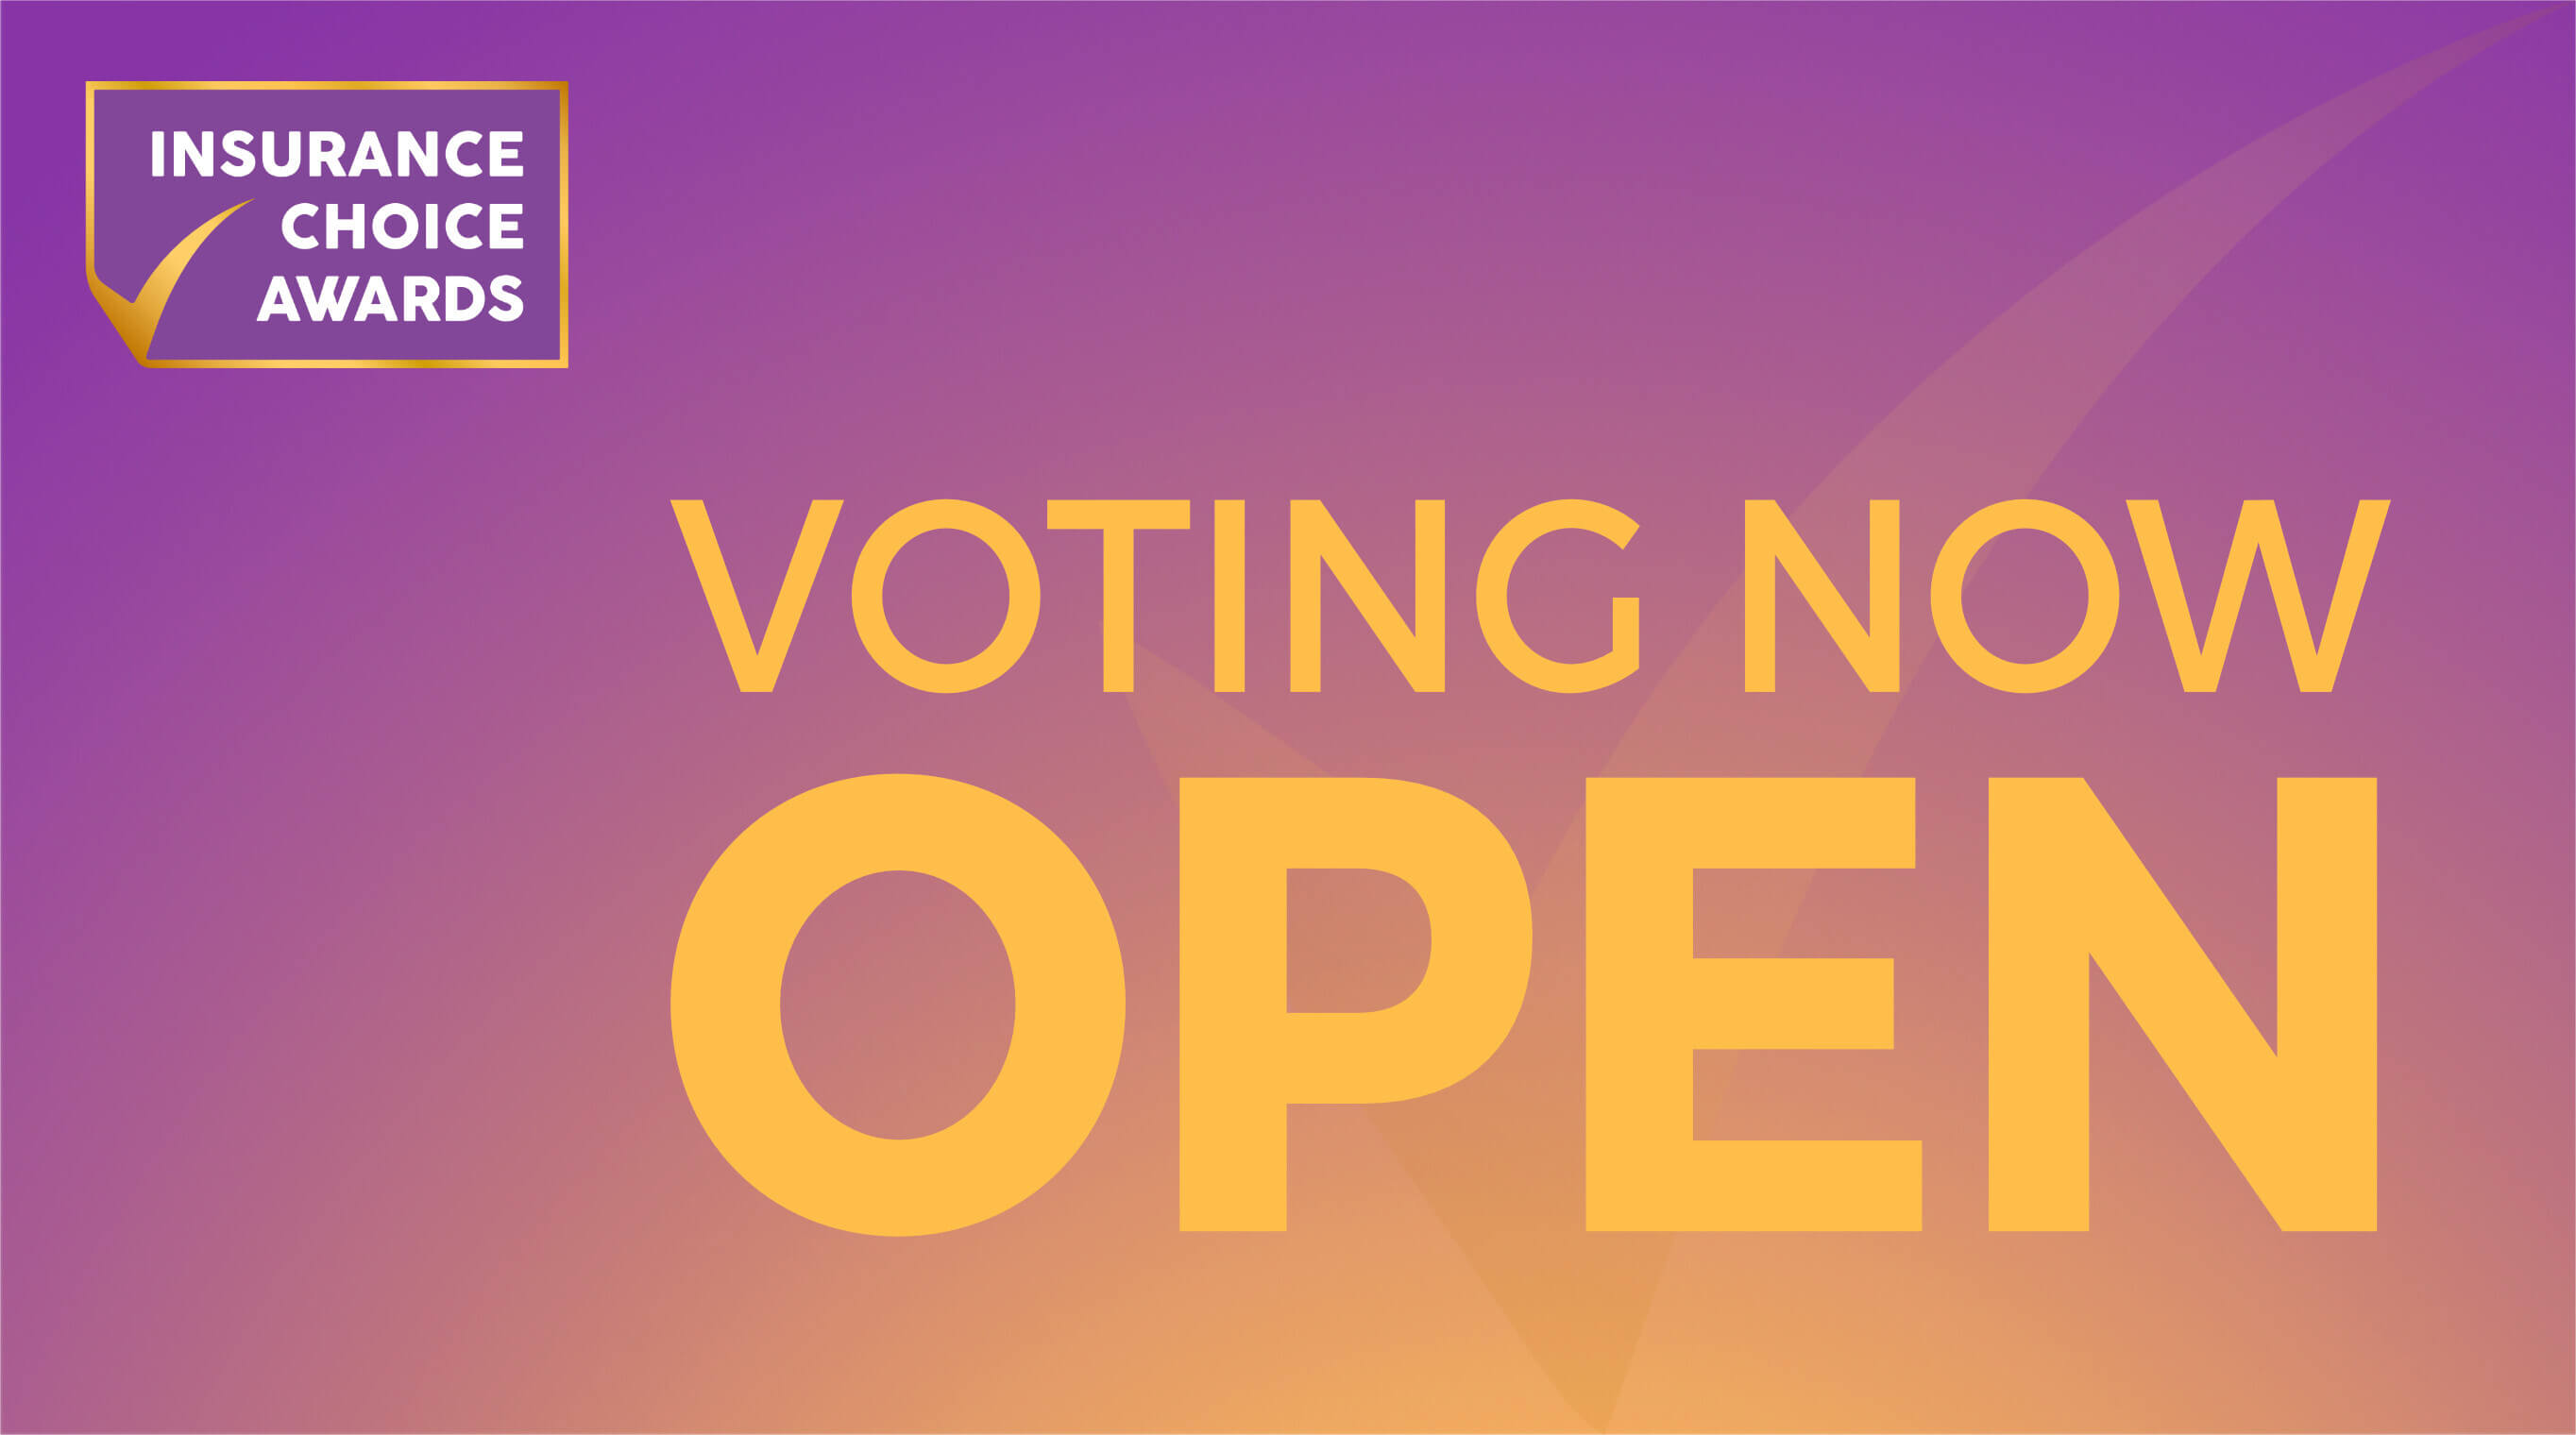 Voting in the Insurance Choice Awards 2020 is open!